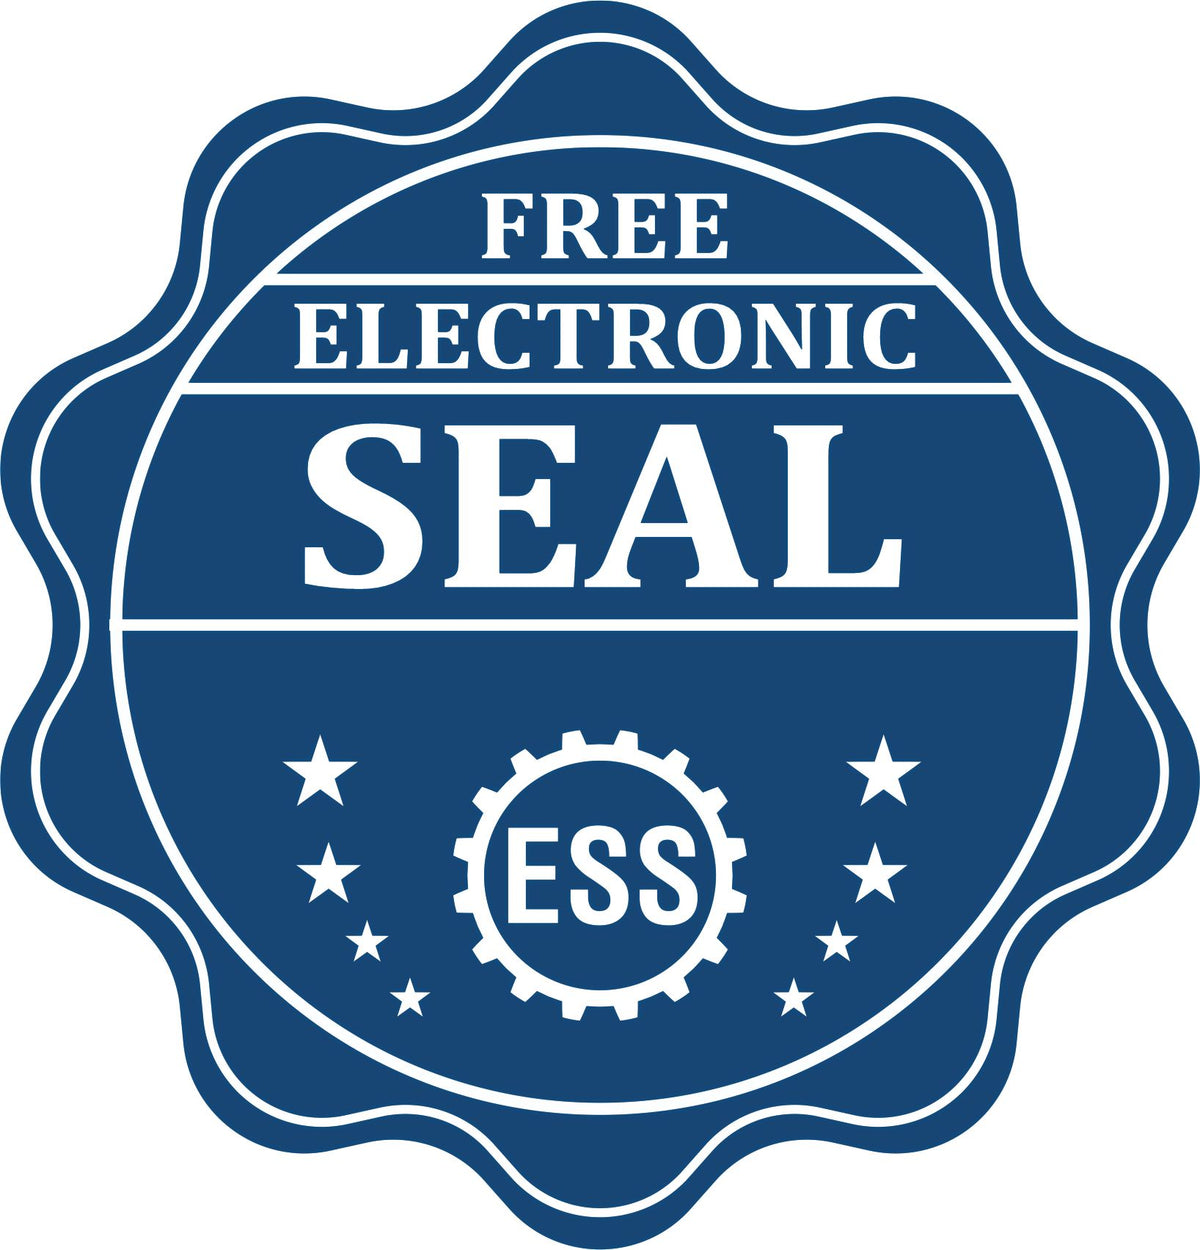 A badge showing a free electronic seal for the PSI Missouri Notary Stamp with stars and the ESS gear on the emblem.